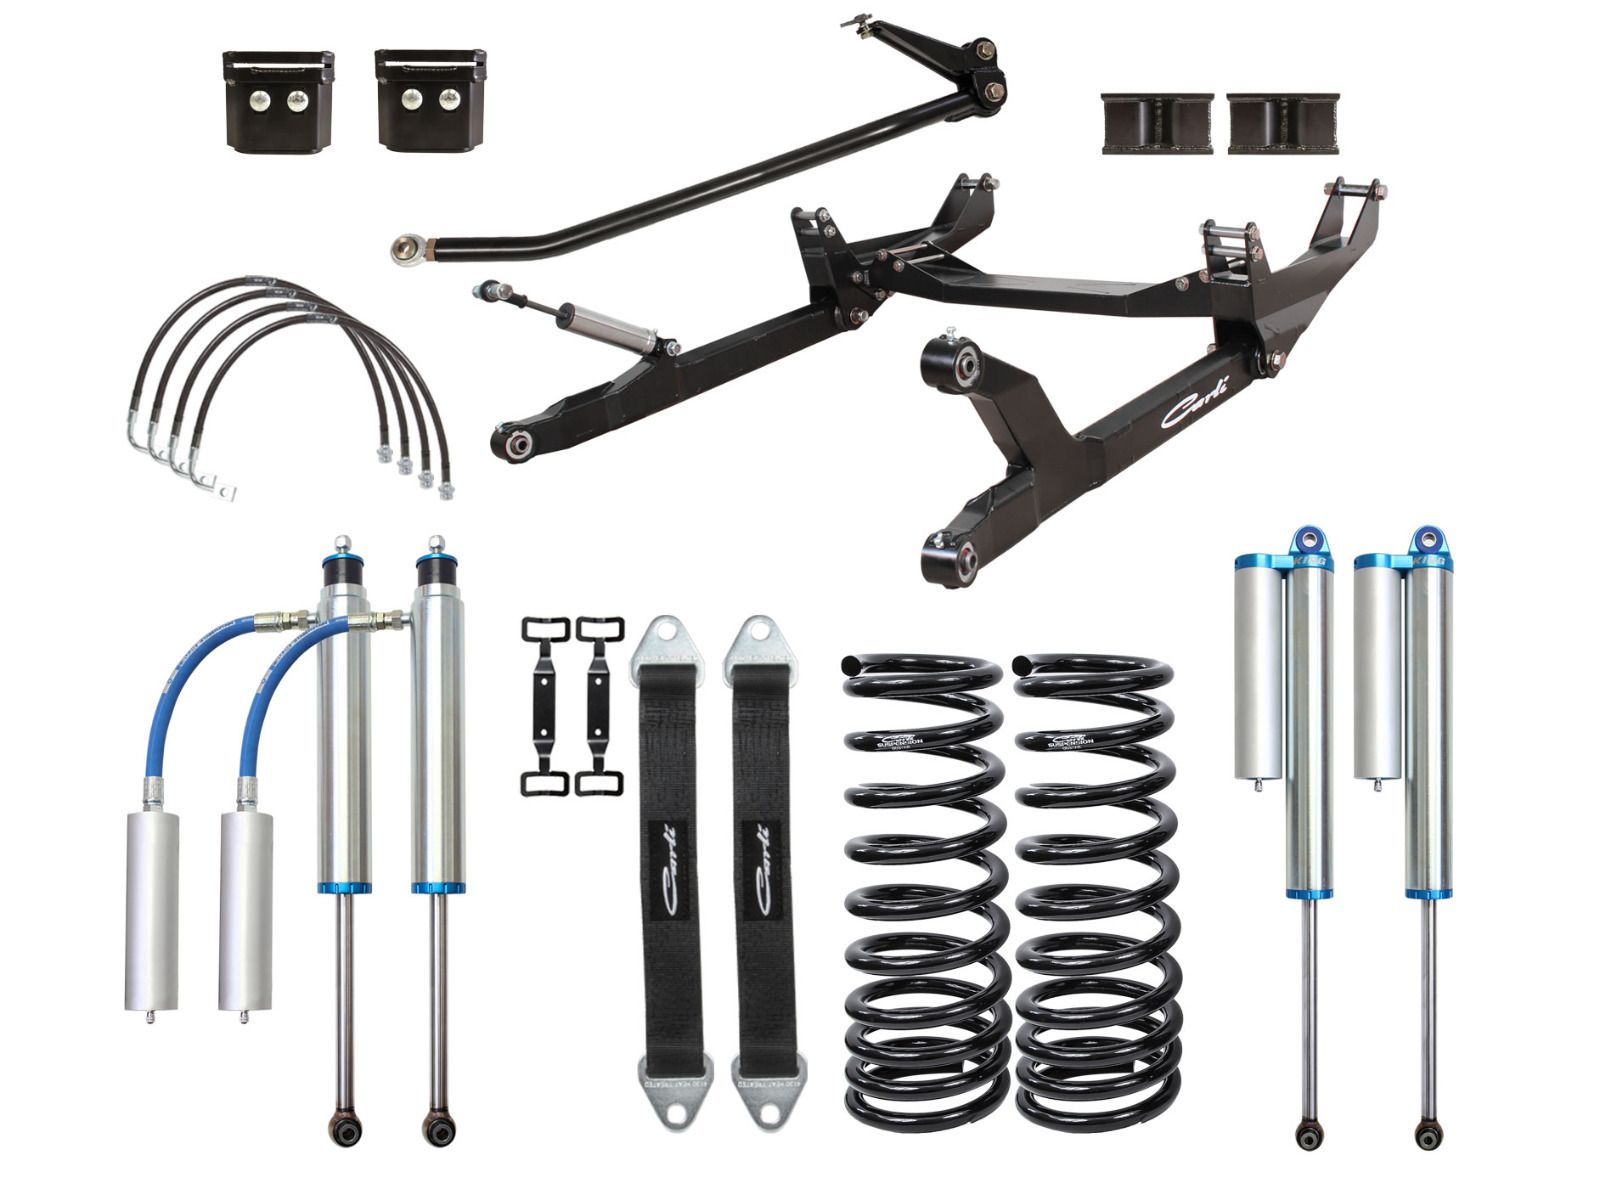 6" 2012-2013 Dodge Ram 2500 4wd (w/Diesel Engine) Pintop Lift System by Carli Suspension